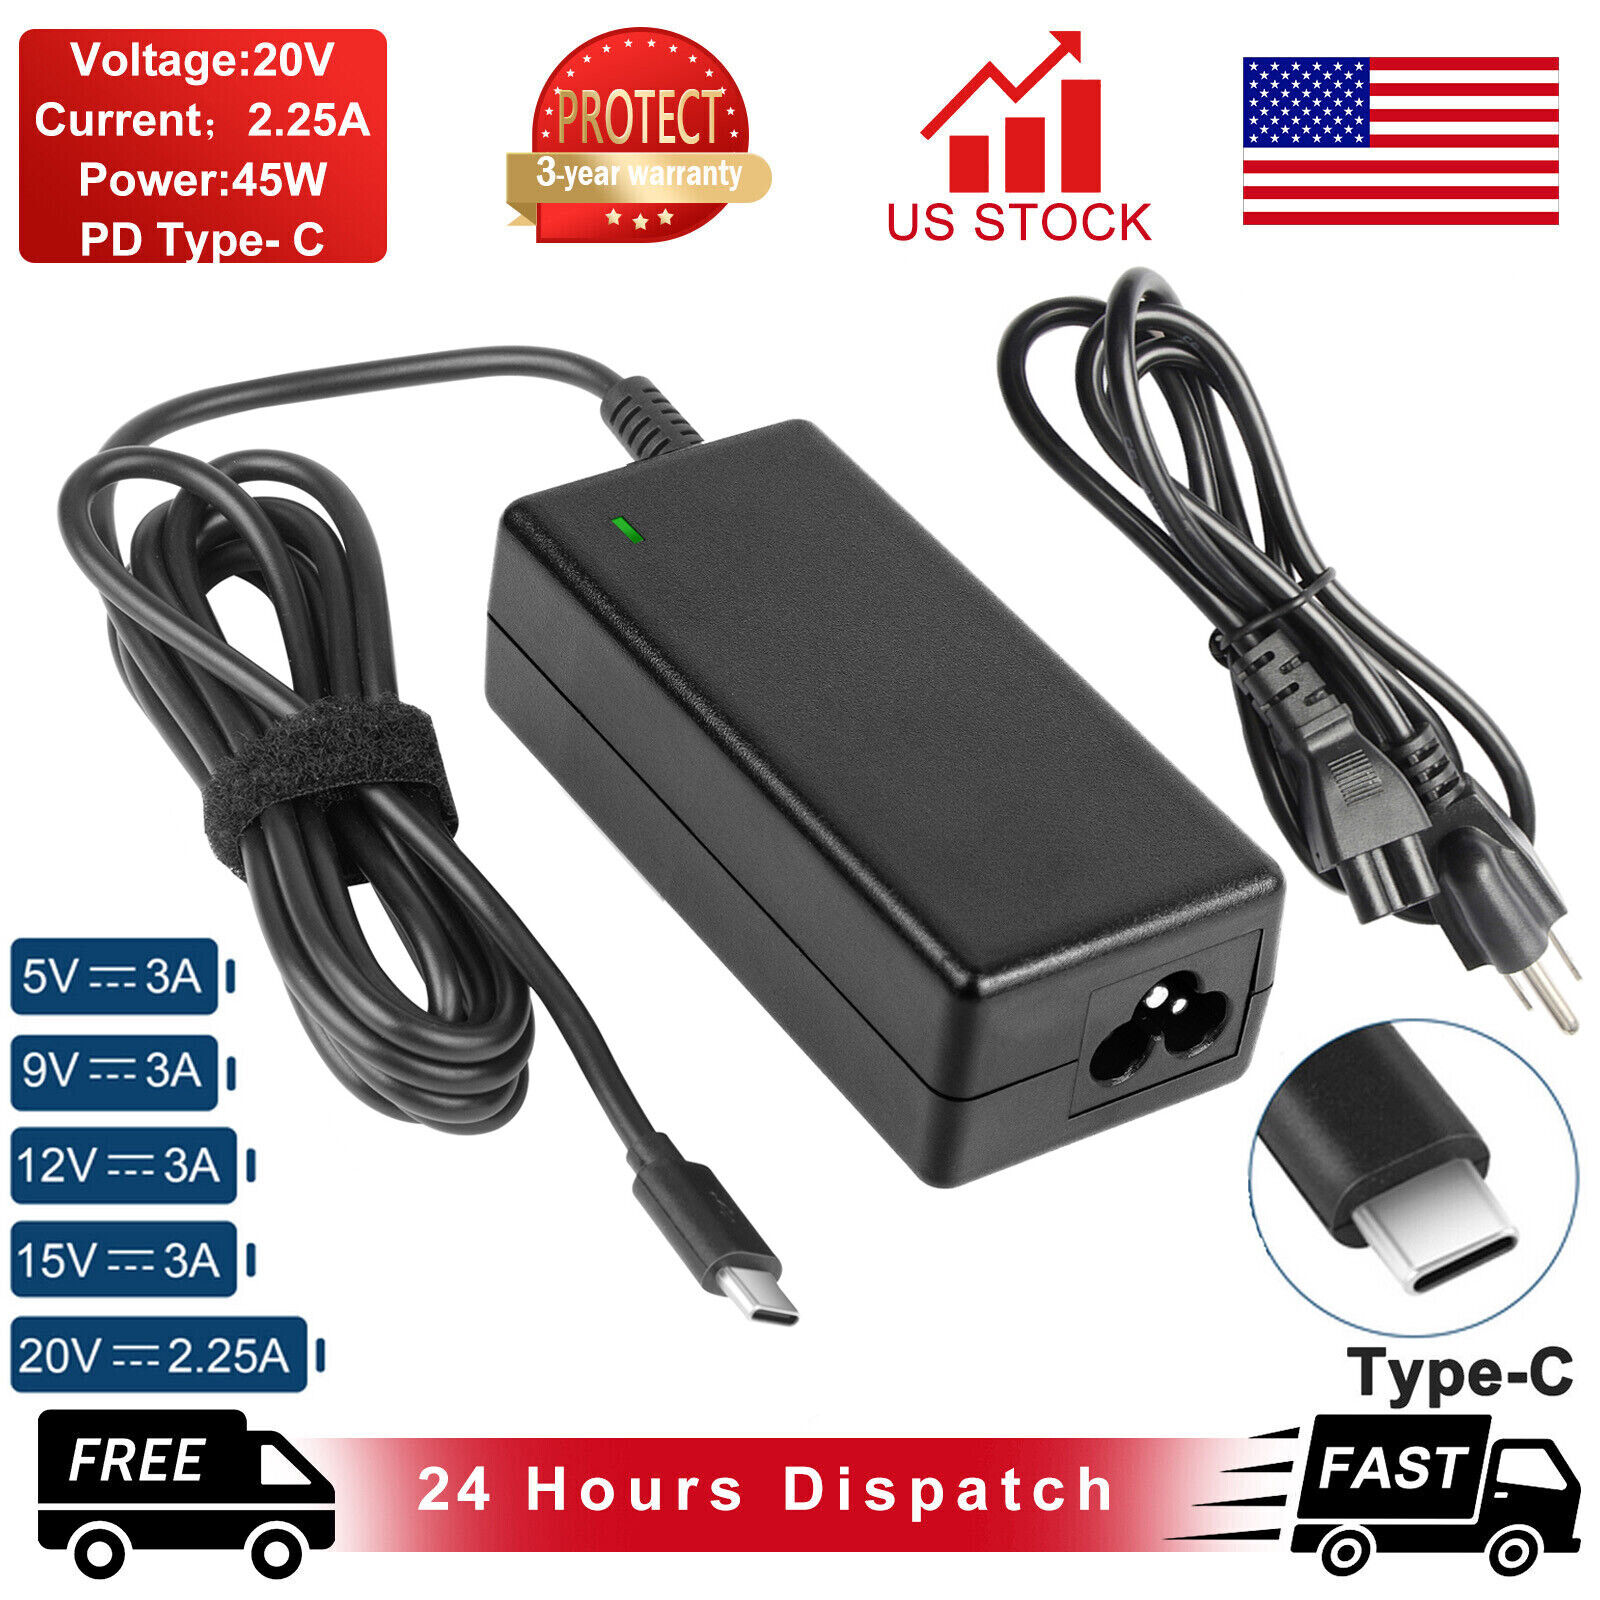 45W TYPE-C Laptop Charger Replacement for Lenovo Chromebook ThinkPad Power Cord